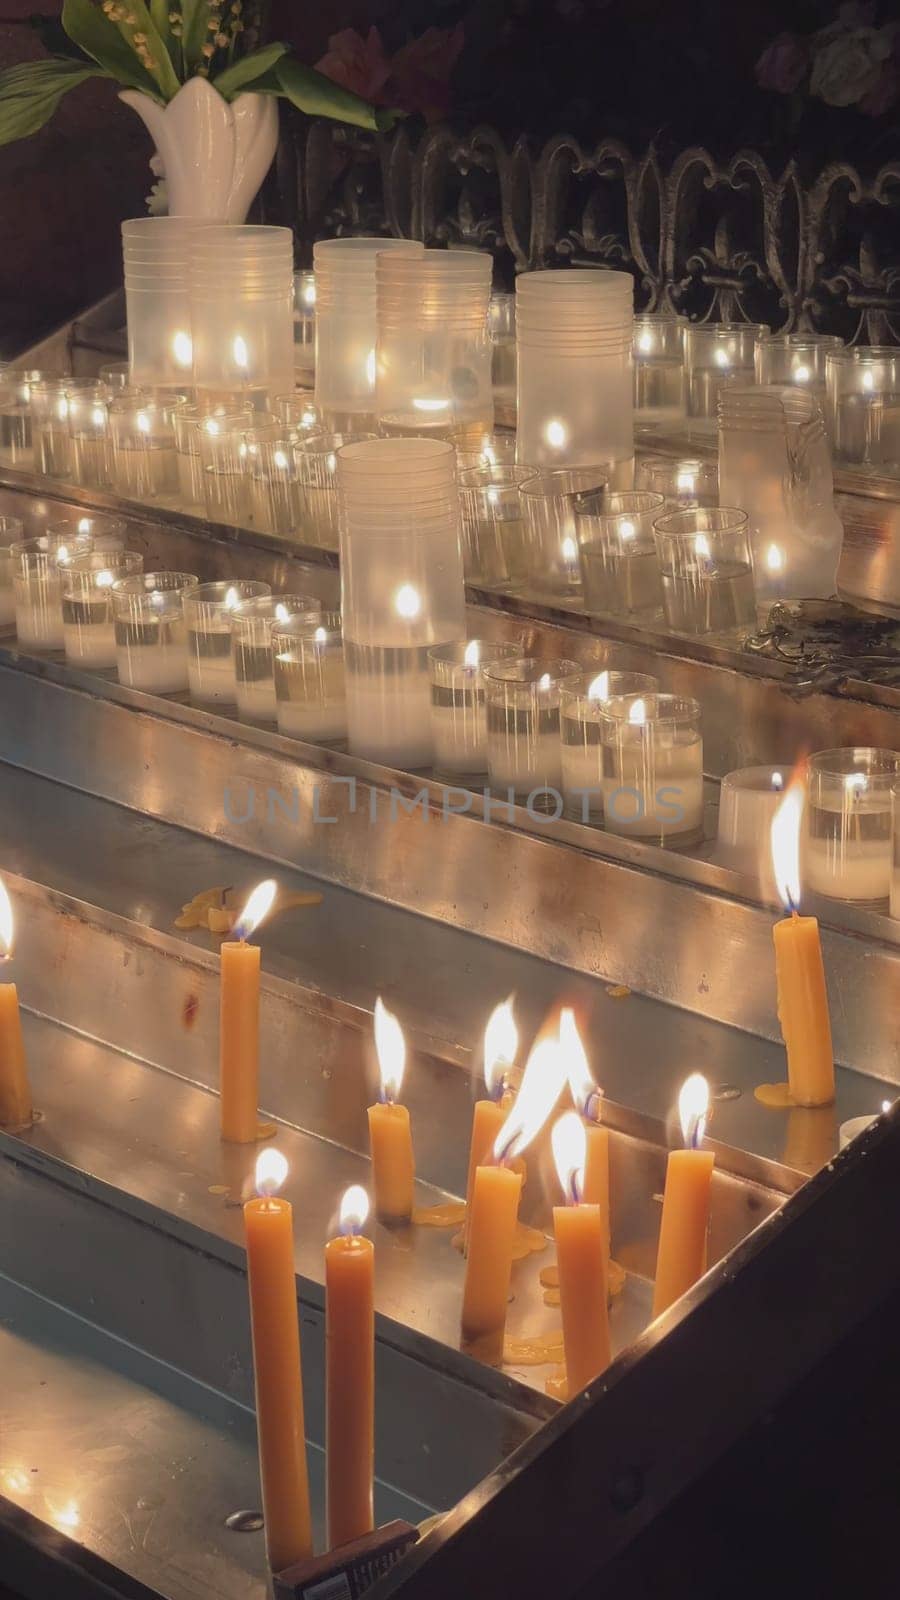 Candles are lit in the Catholic Church. by DovidPro